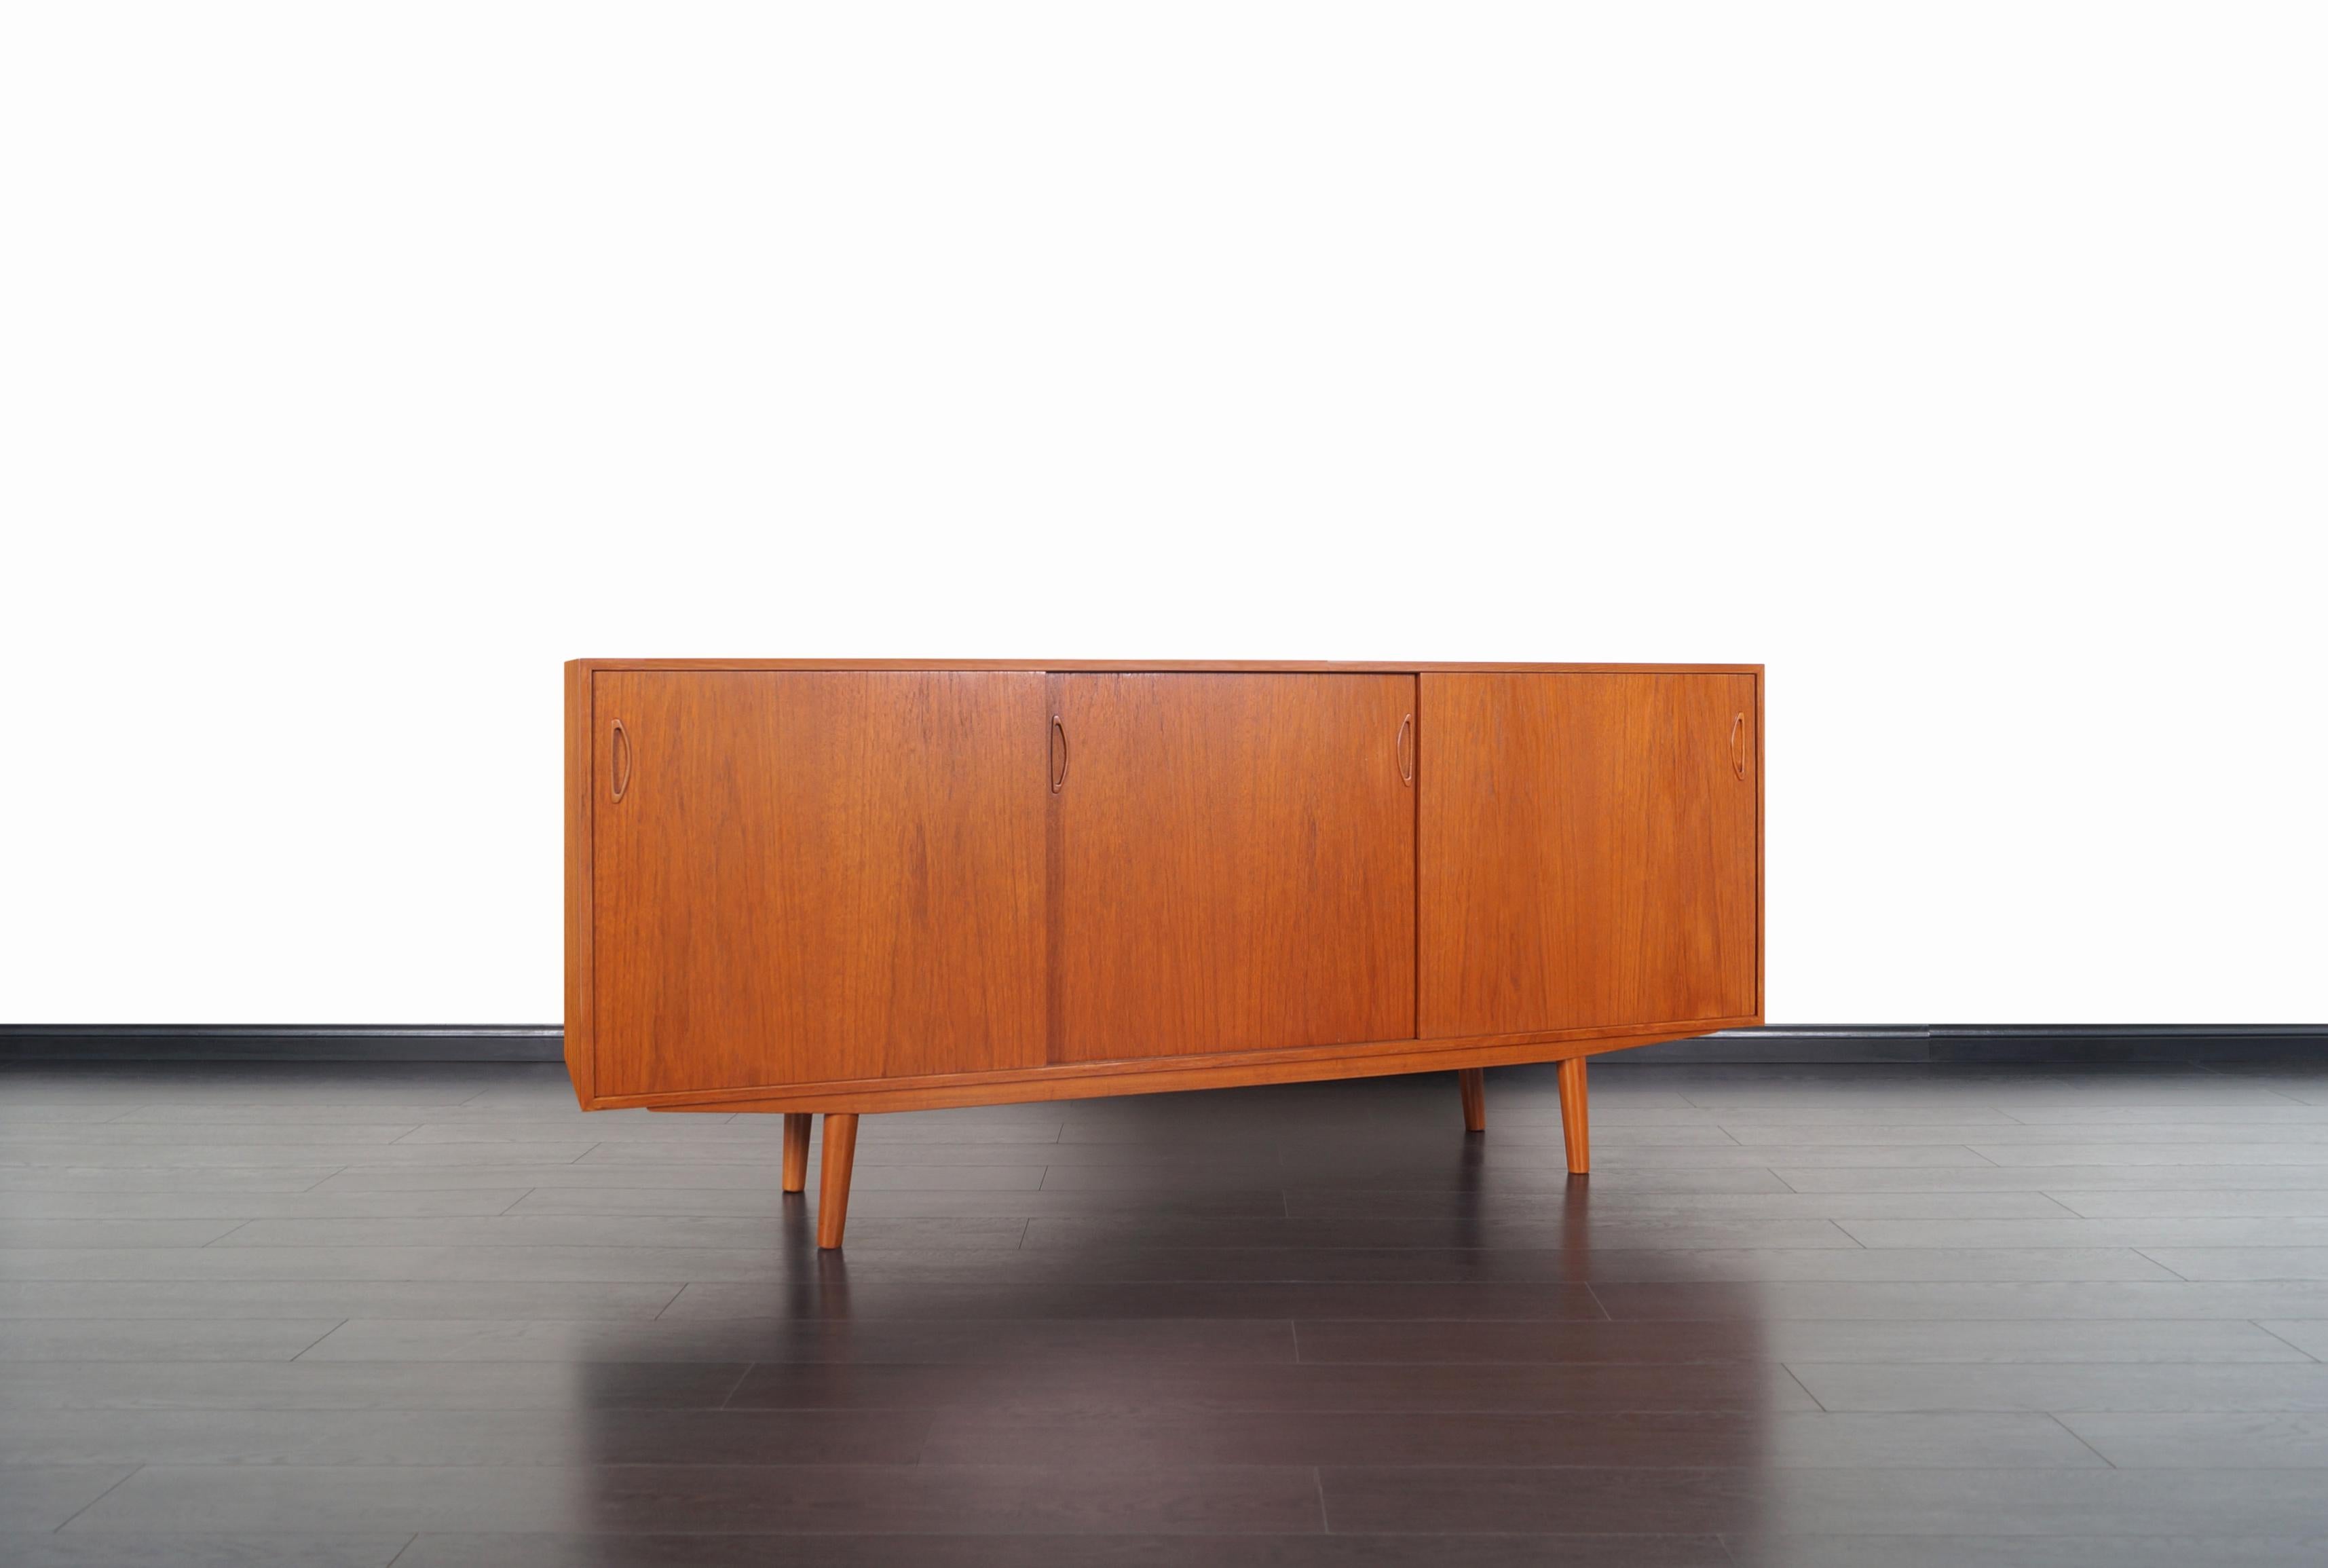 Danish modern teak credenza manufactured in Denmark, circa 1960s. The credenza consist of a sturdy teak wood case that sits on four tapered legs. Features four sliding doors with sculptural pulls that opens up to three sections, revealing two